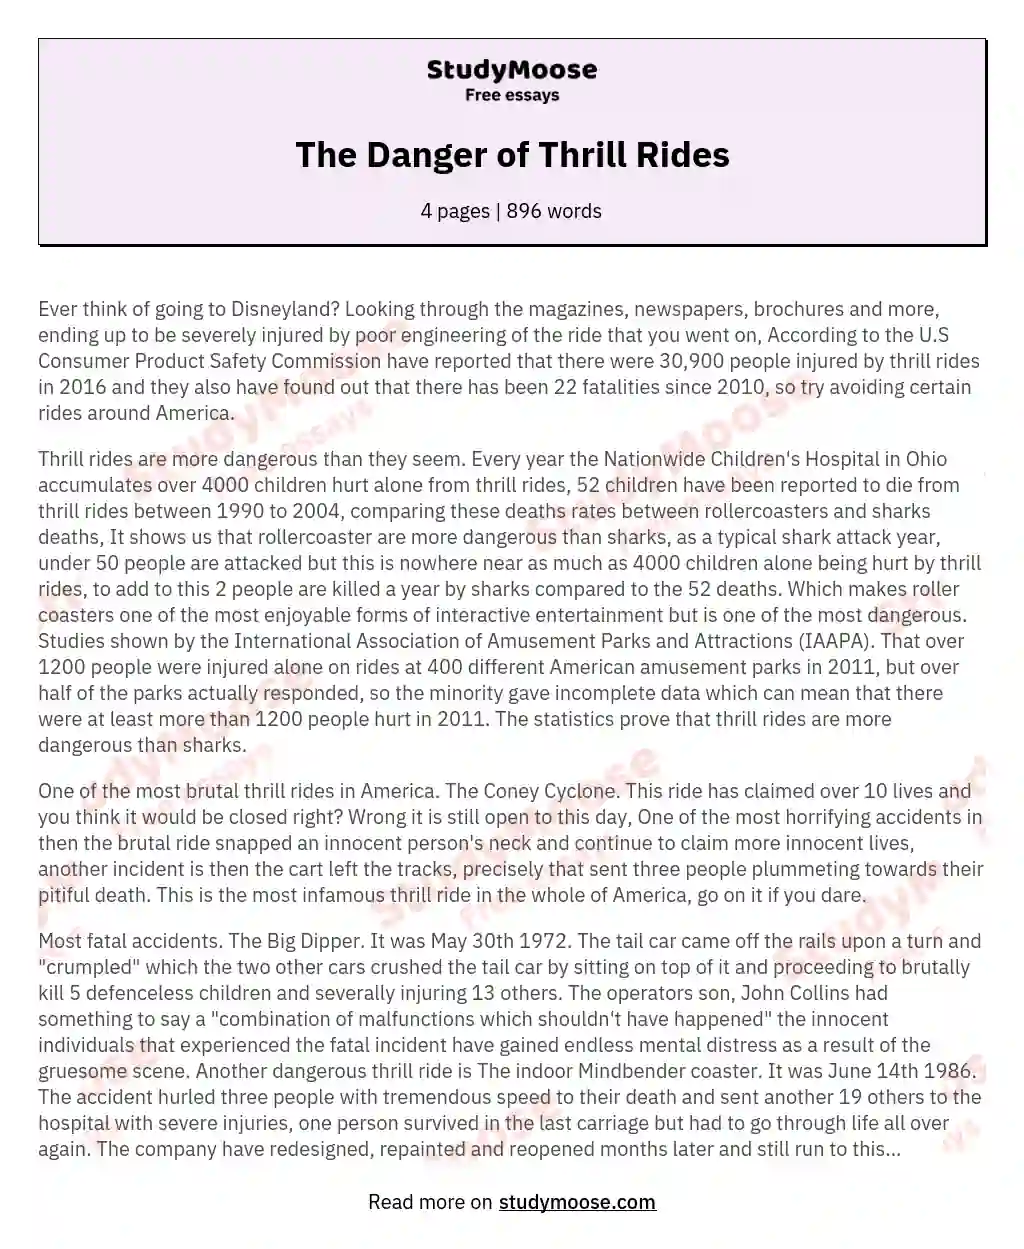 The Danger of Thrill Rides essay